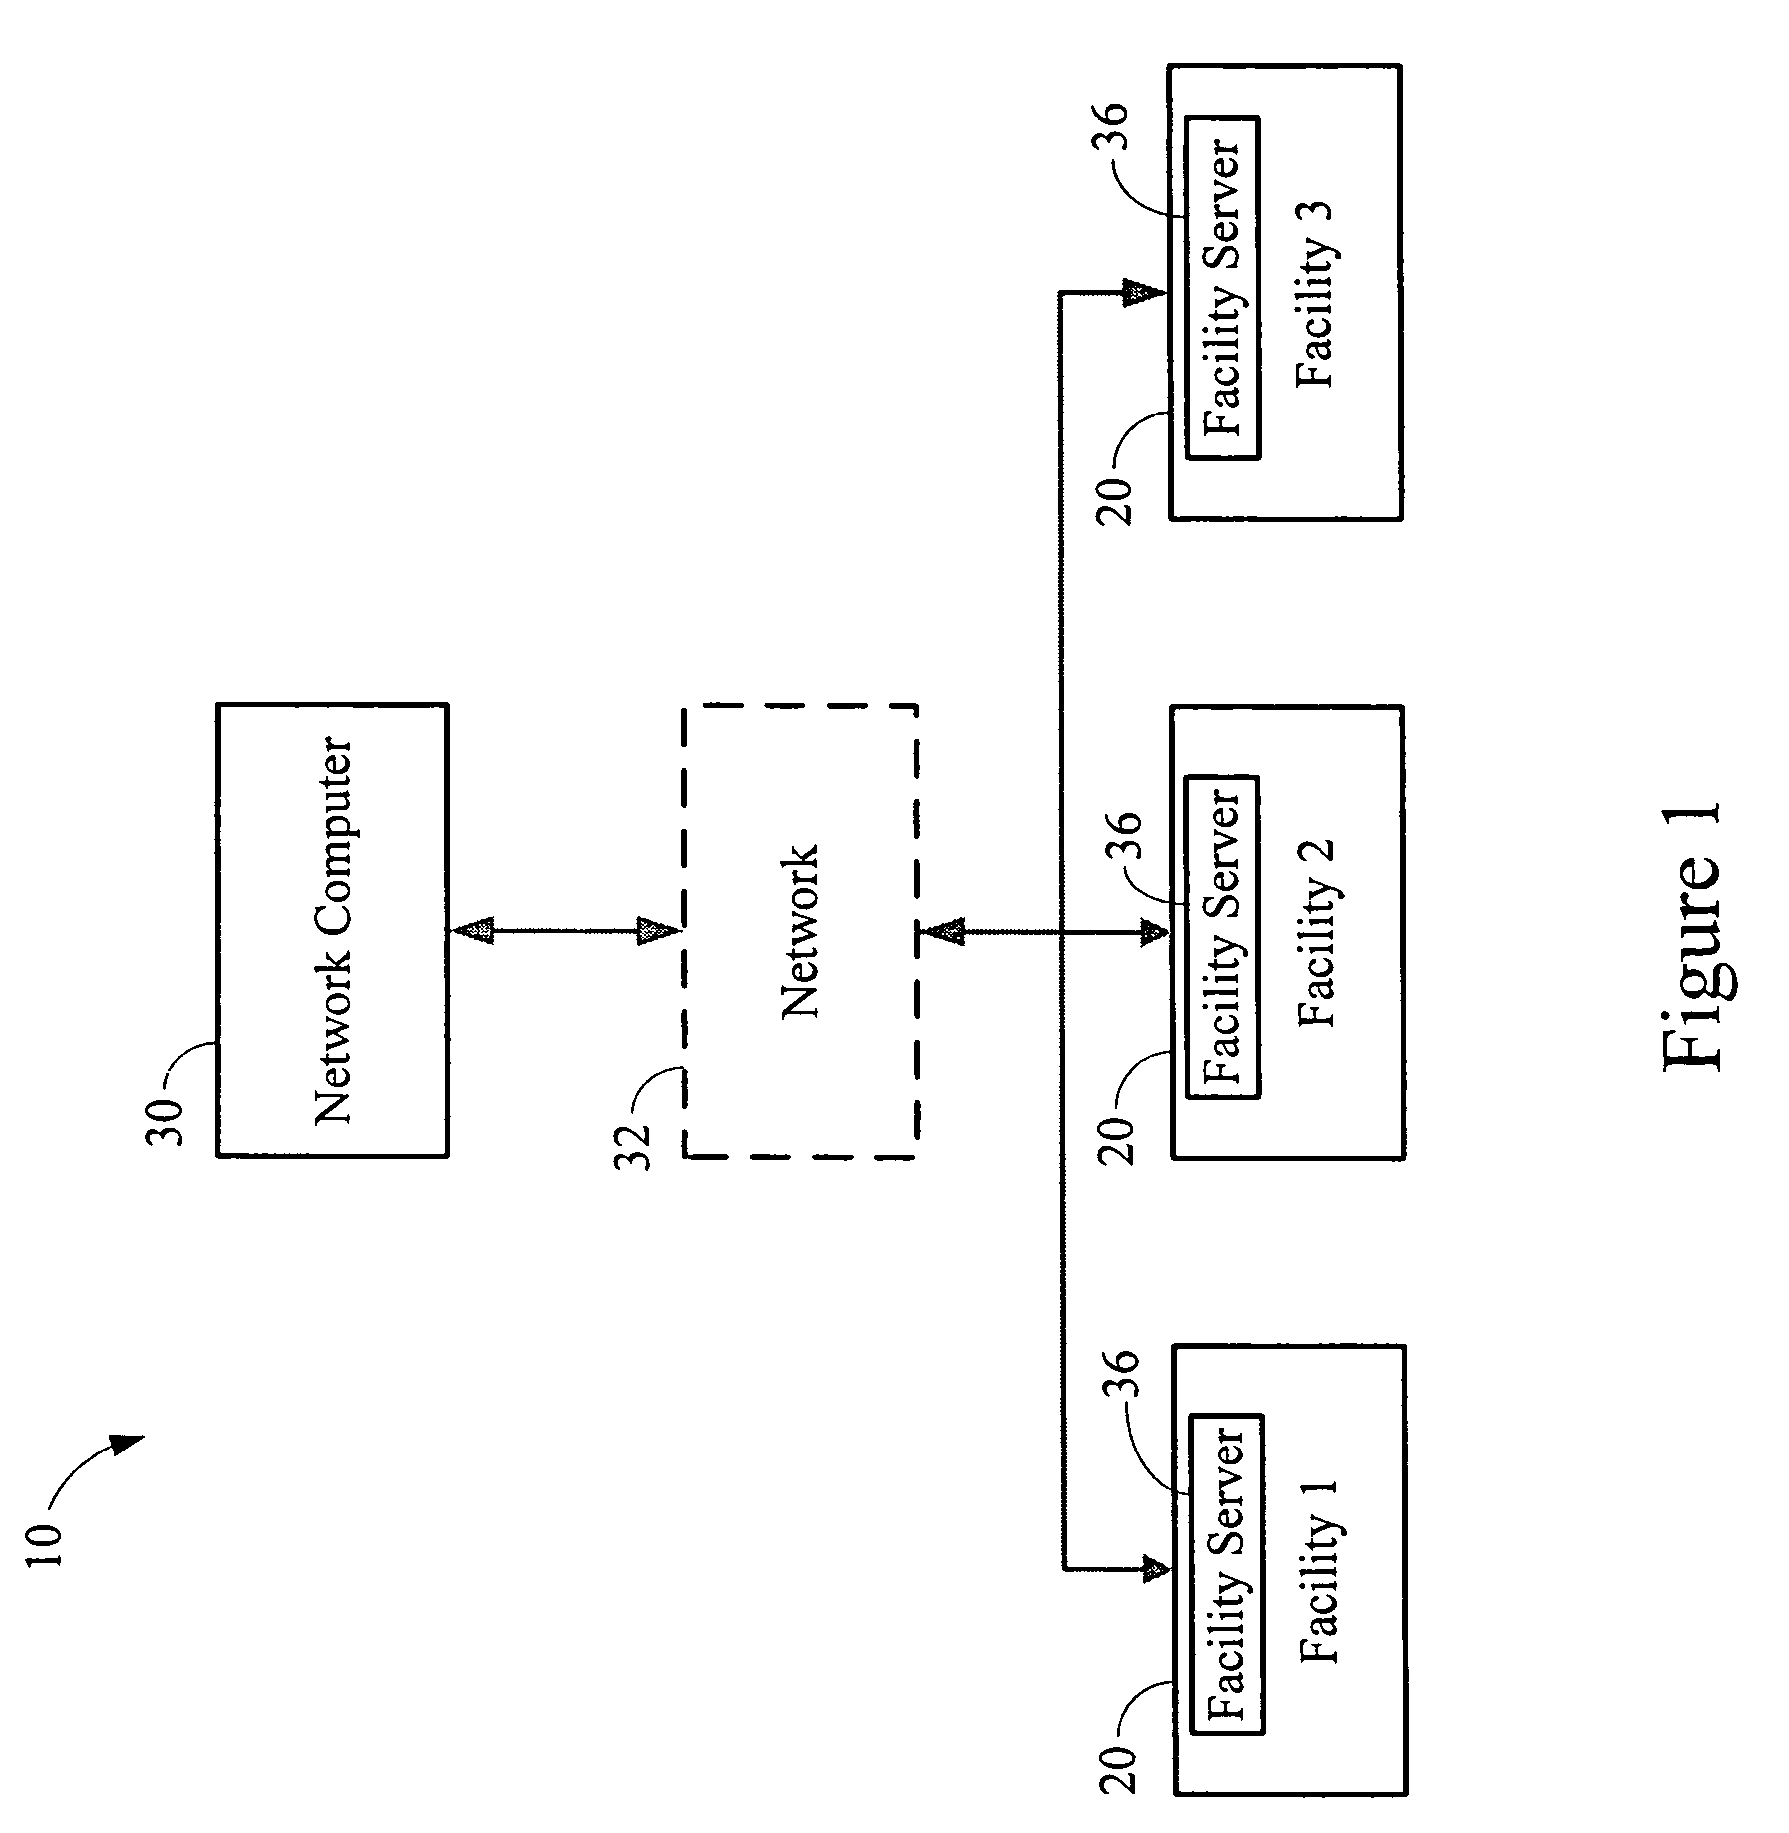 System for separating and distributing pharmacy order processing for specialty medication